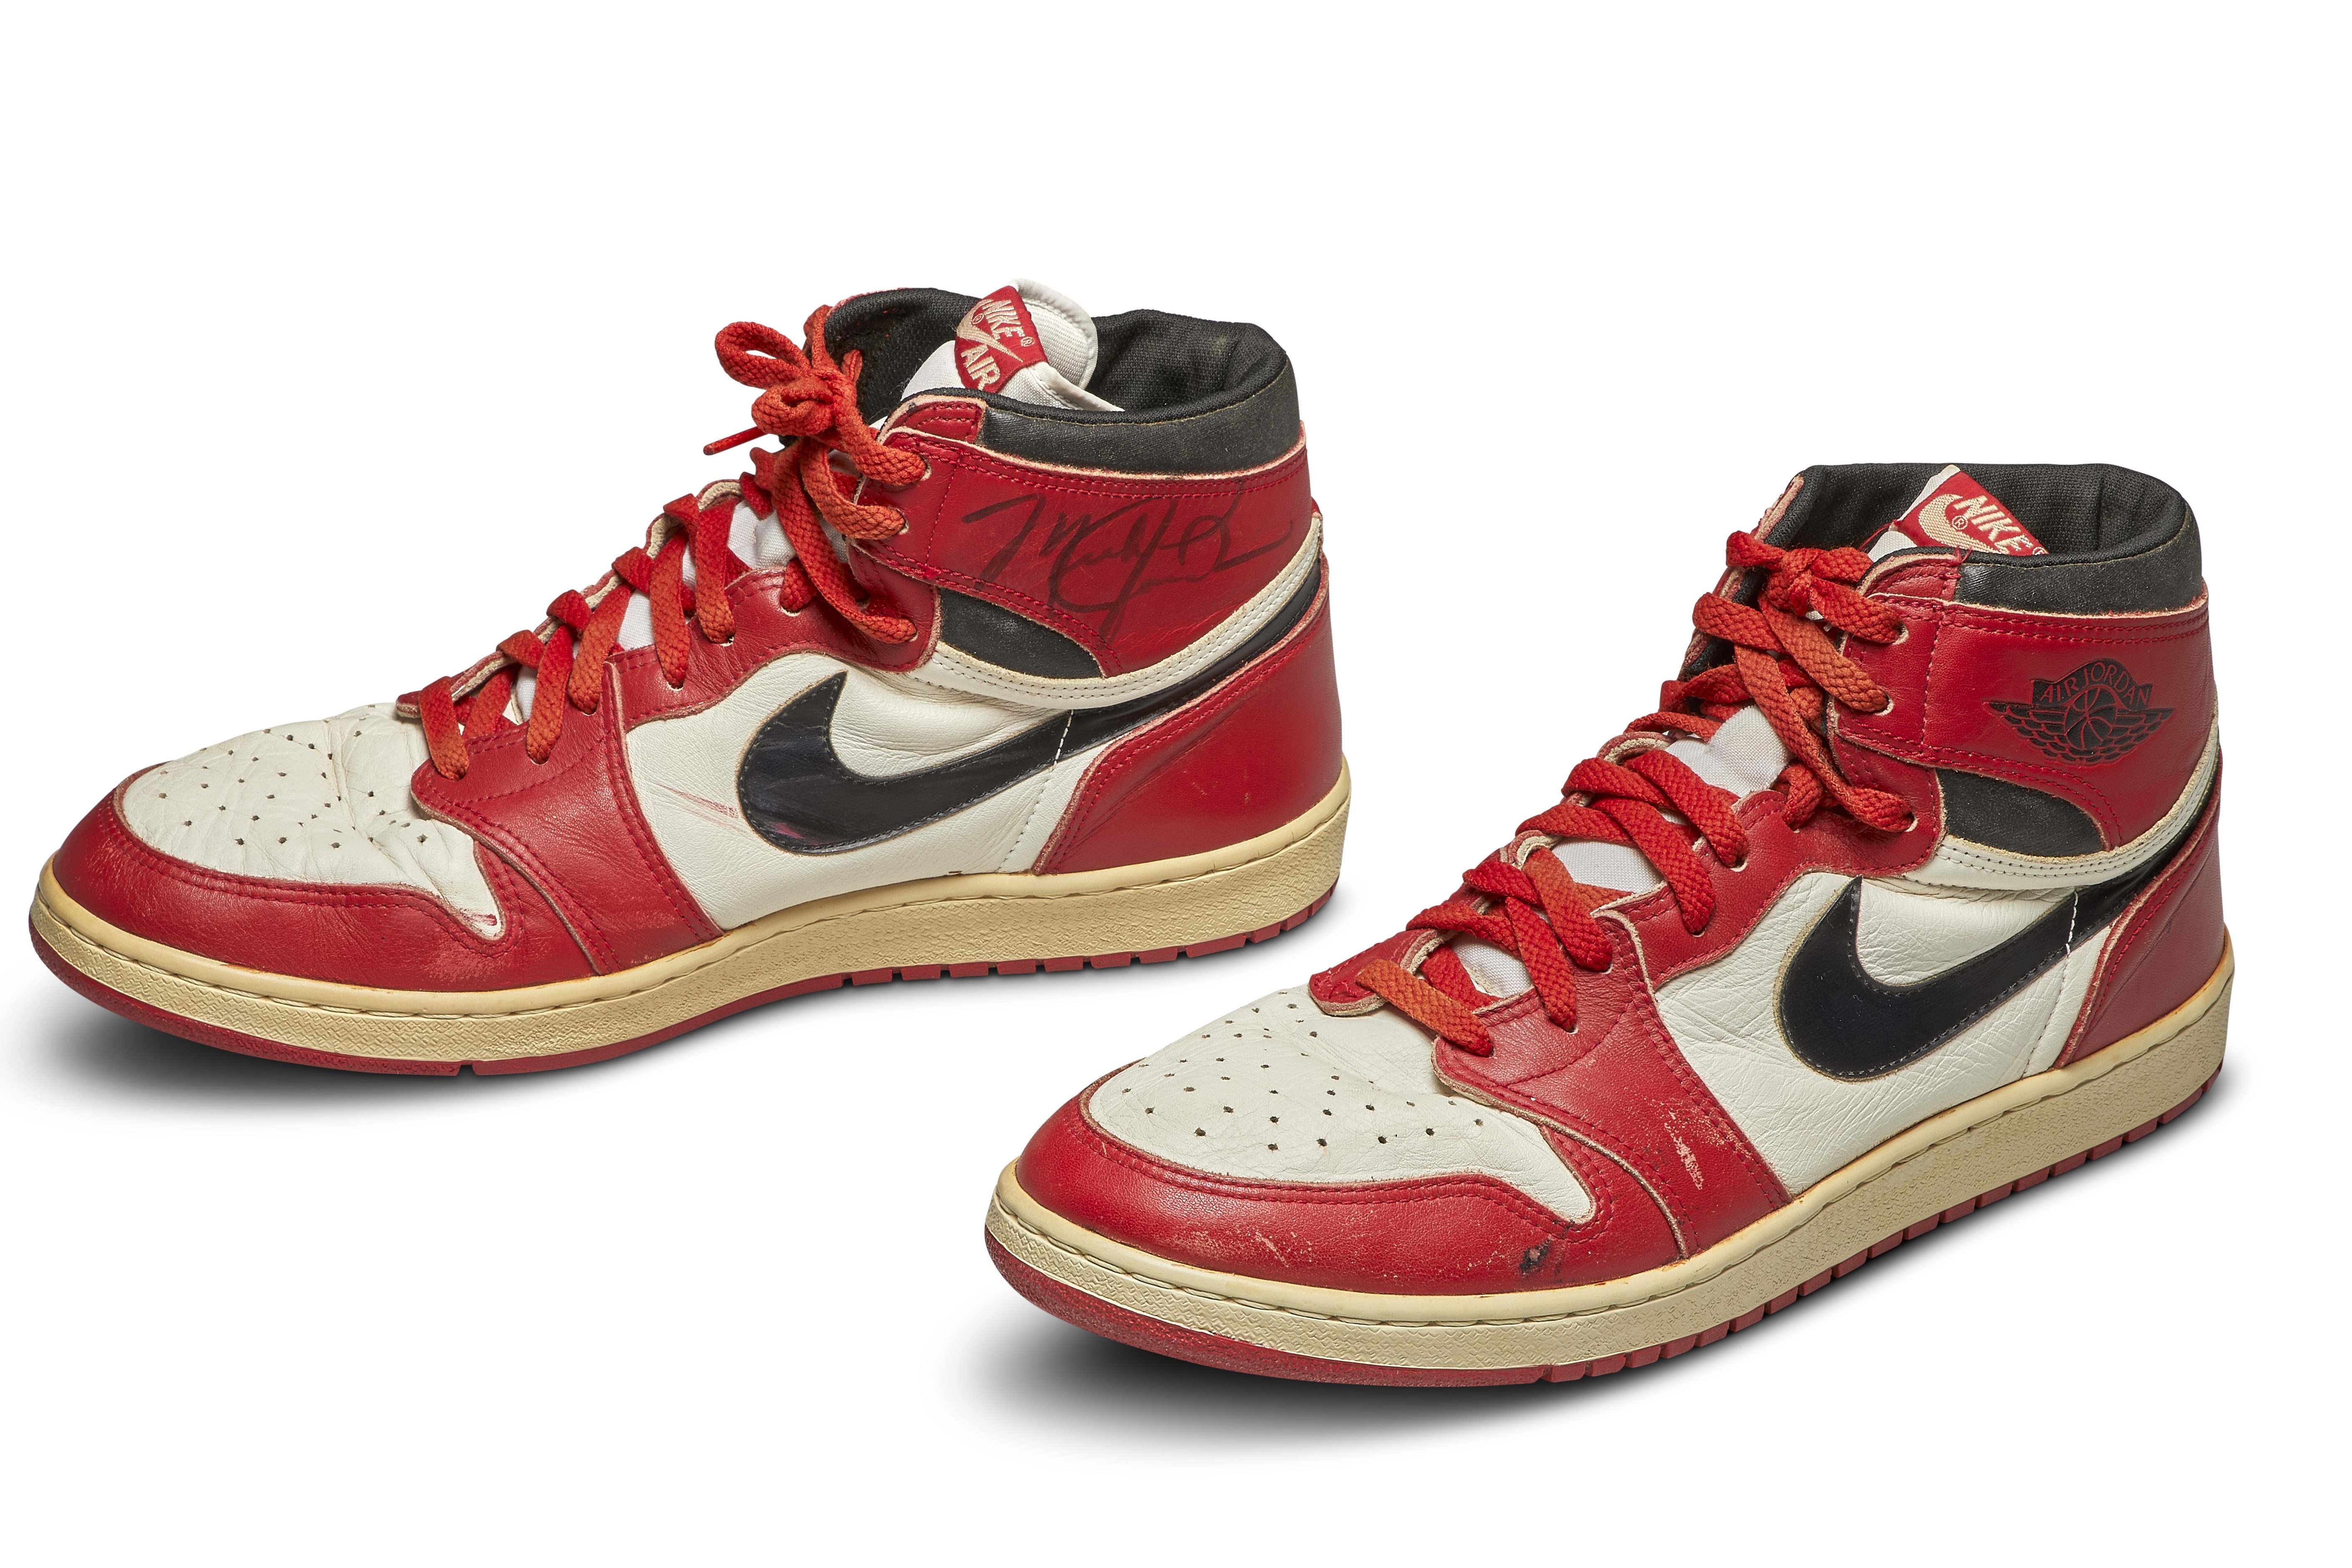 MJ's Game-Worn Nike Air Jordan 1s Could Be Yours